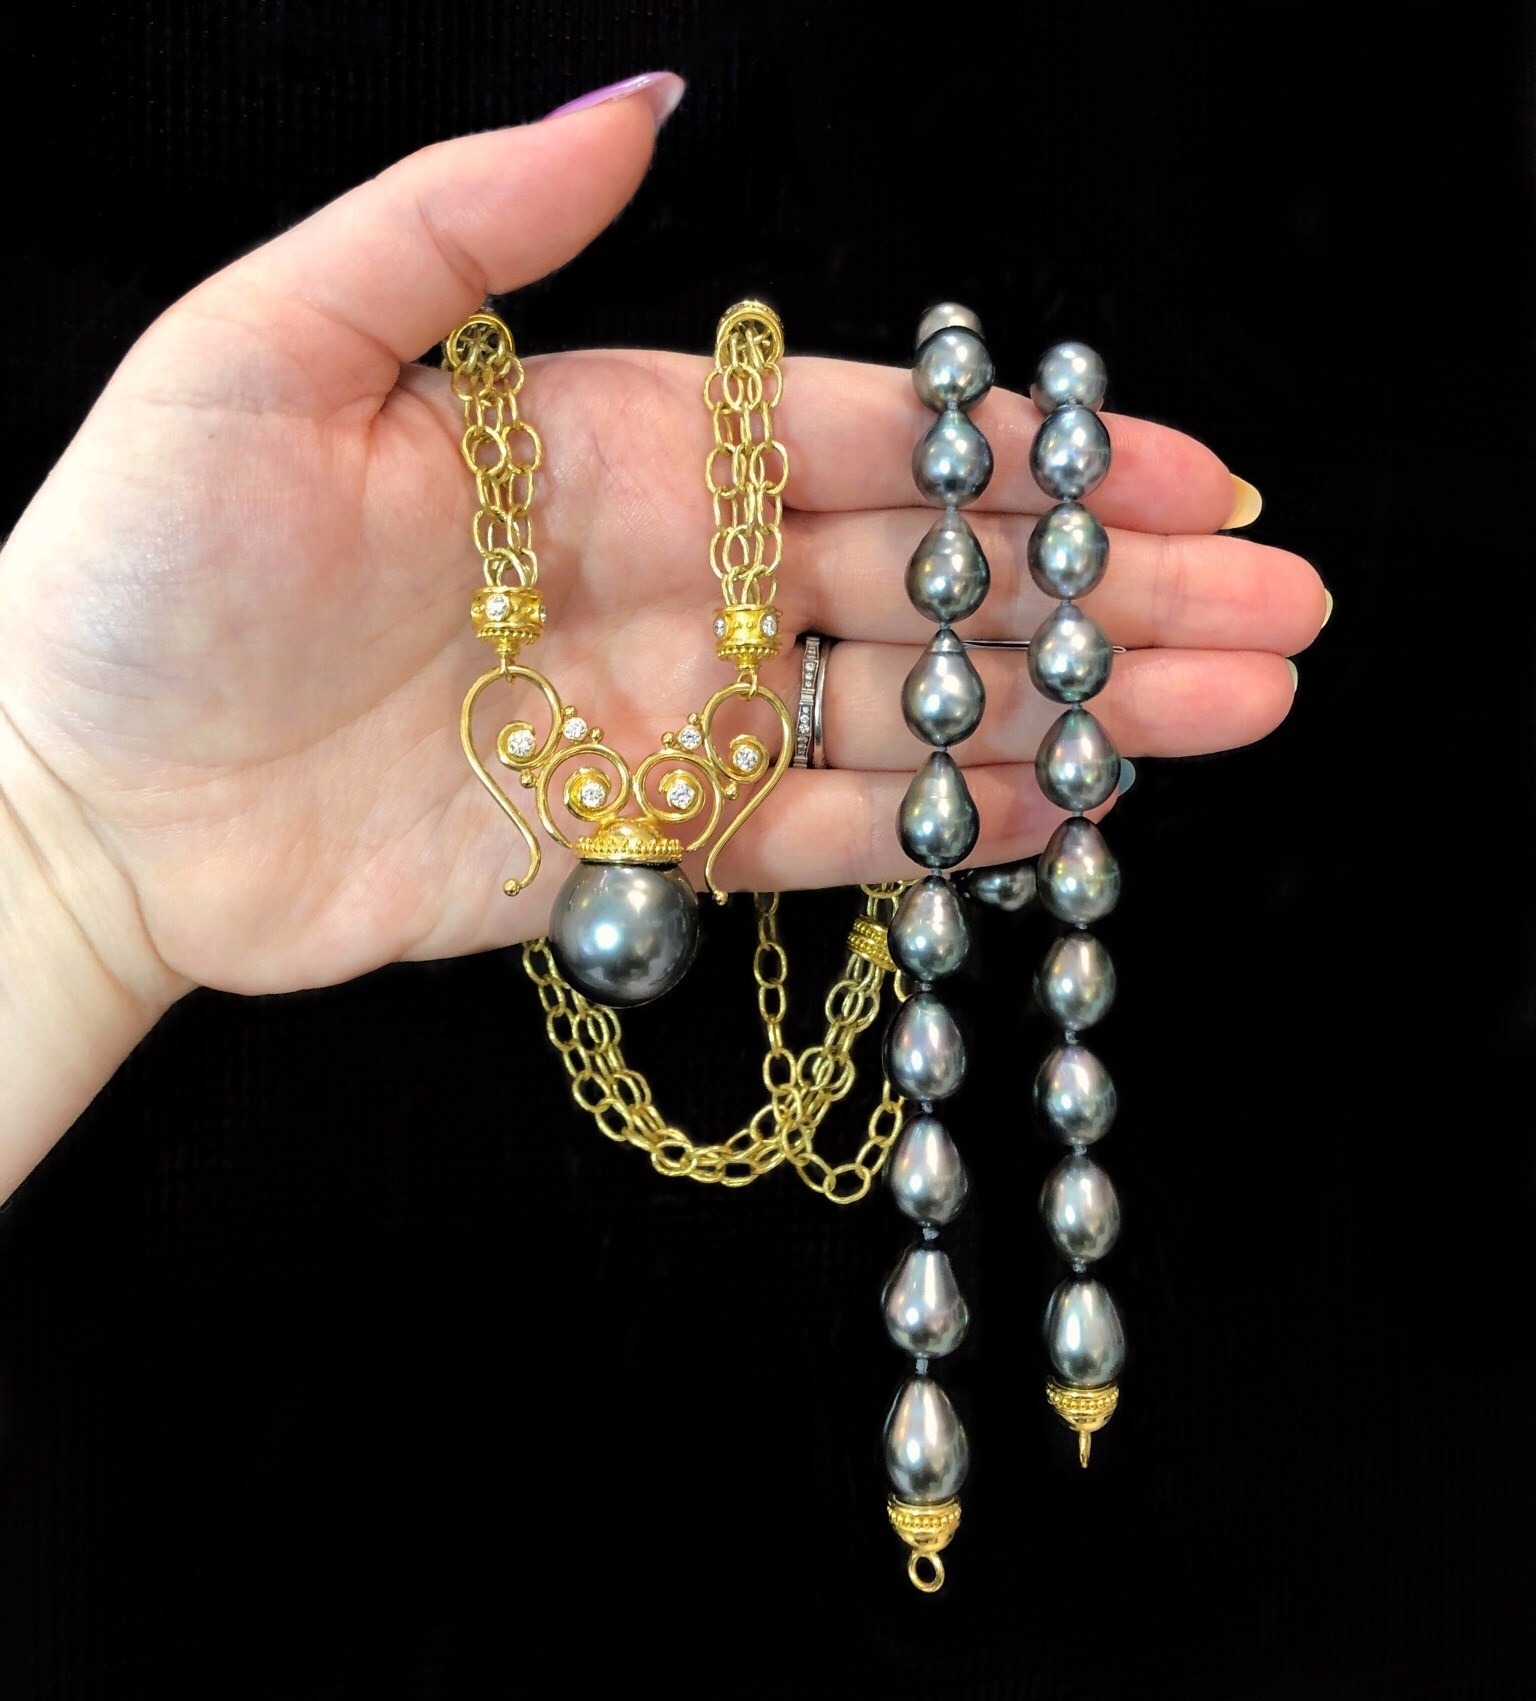 Two glorious 22K yellow gold and Tahitian pearl necklaces by Valerie Naifeh!